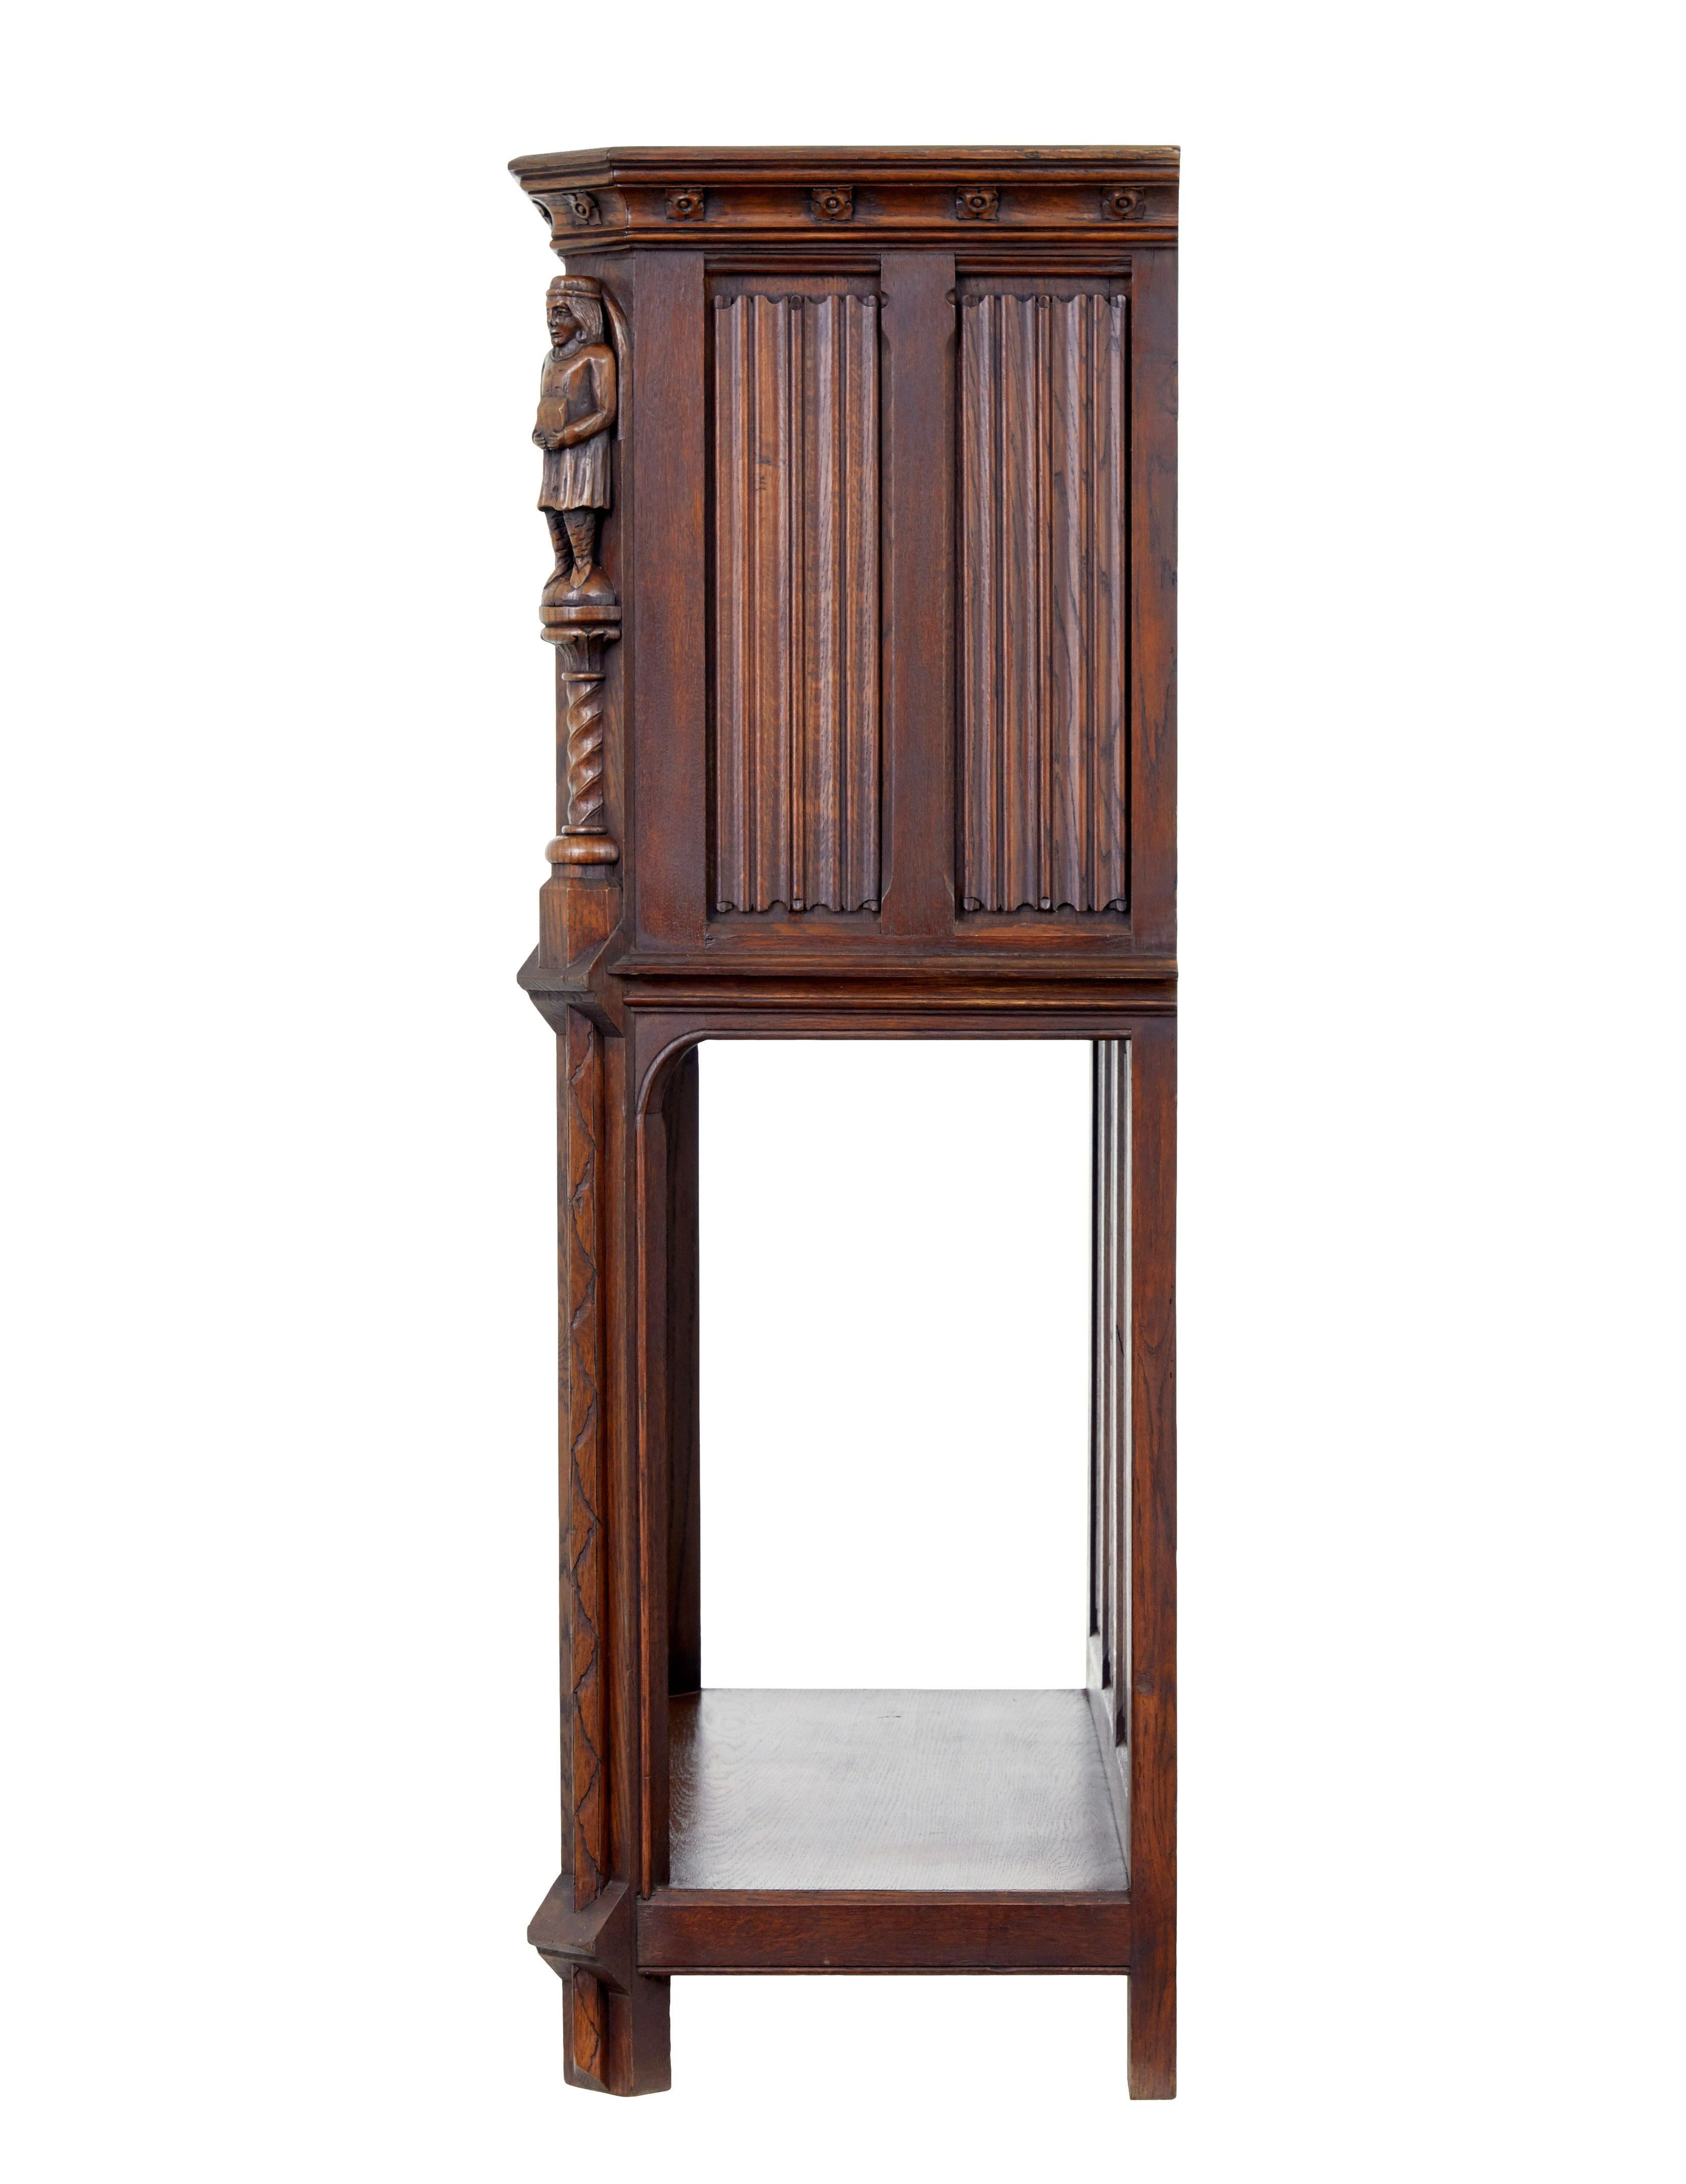 English Early 20th century carved oak renaissance revival cupboard For Sale